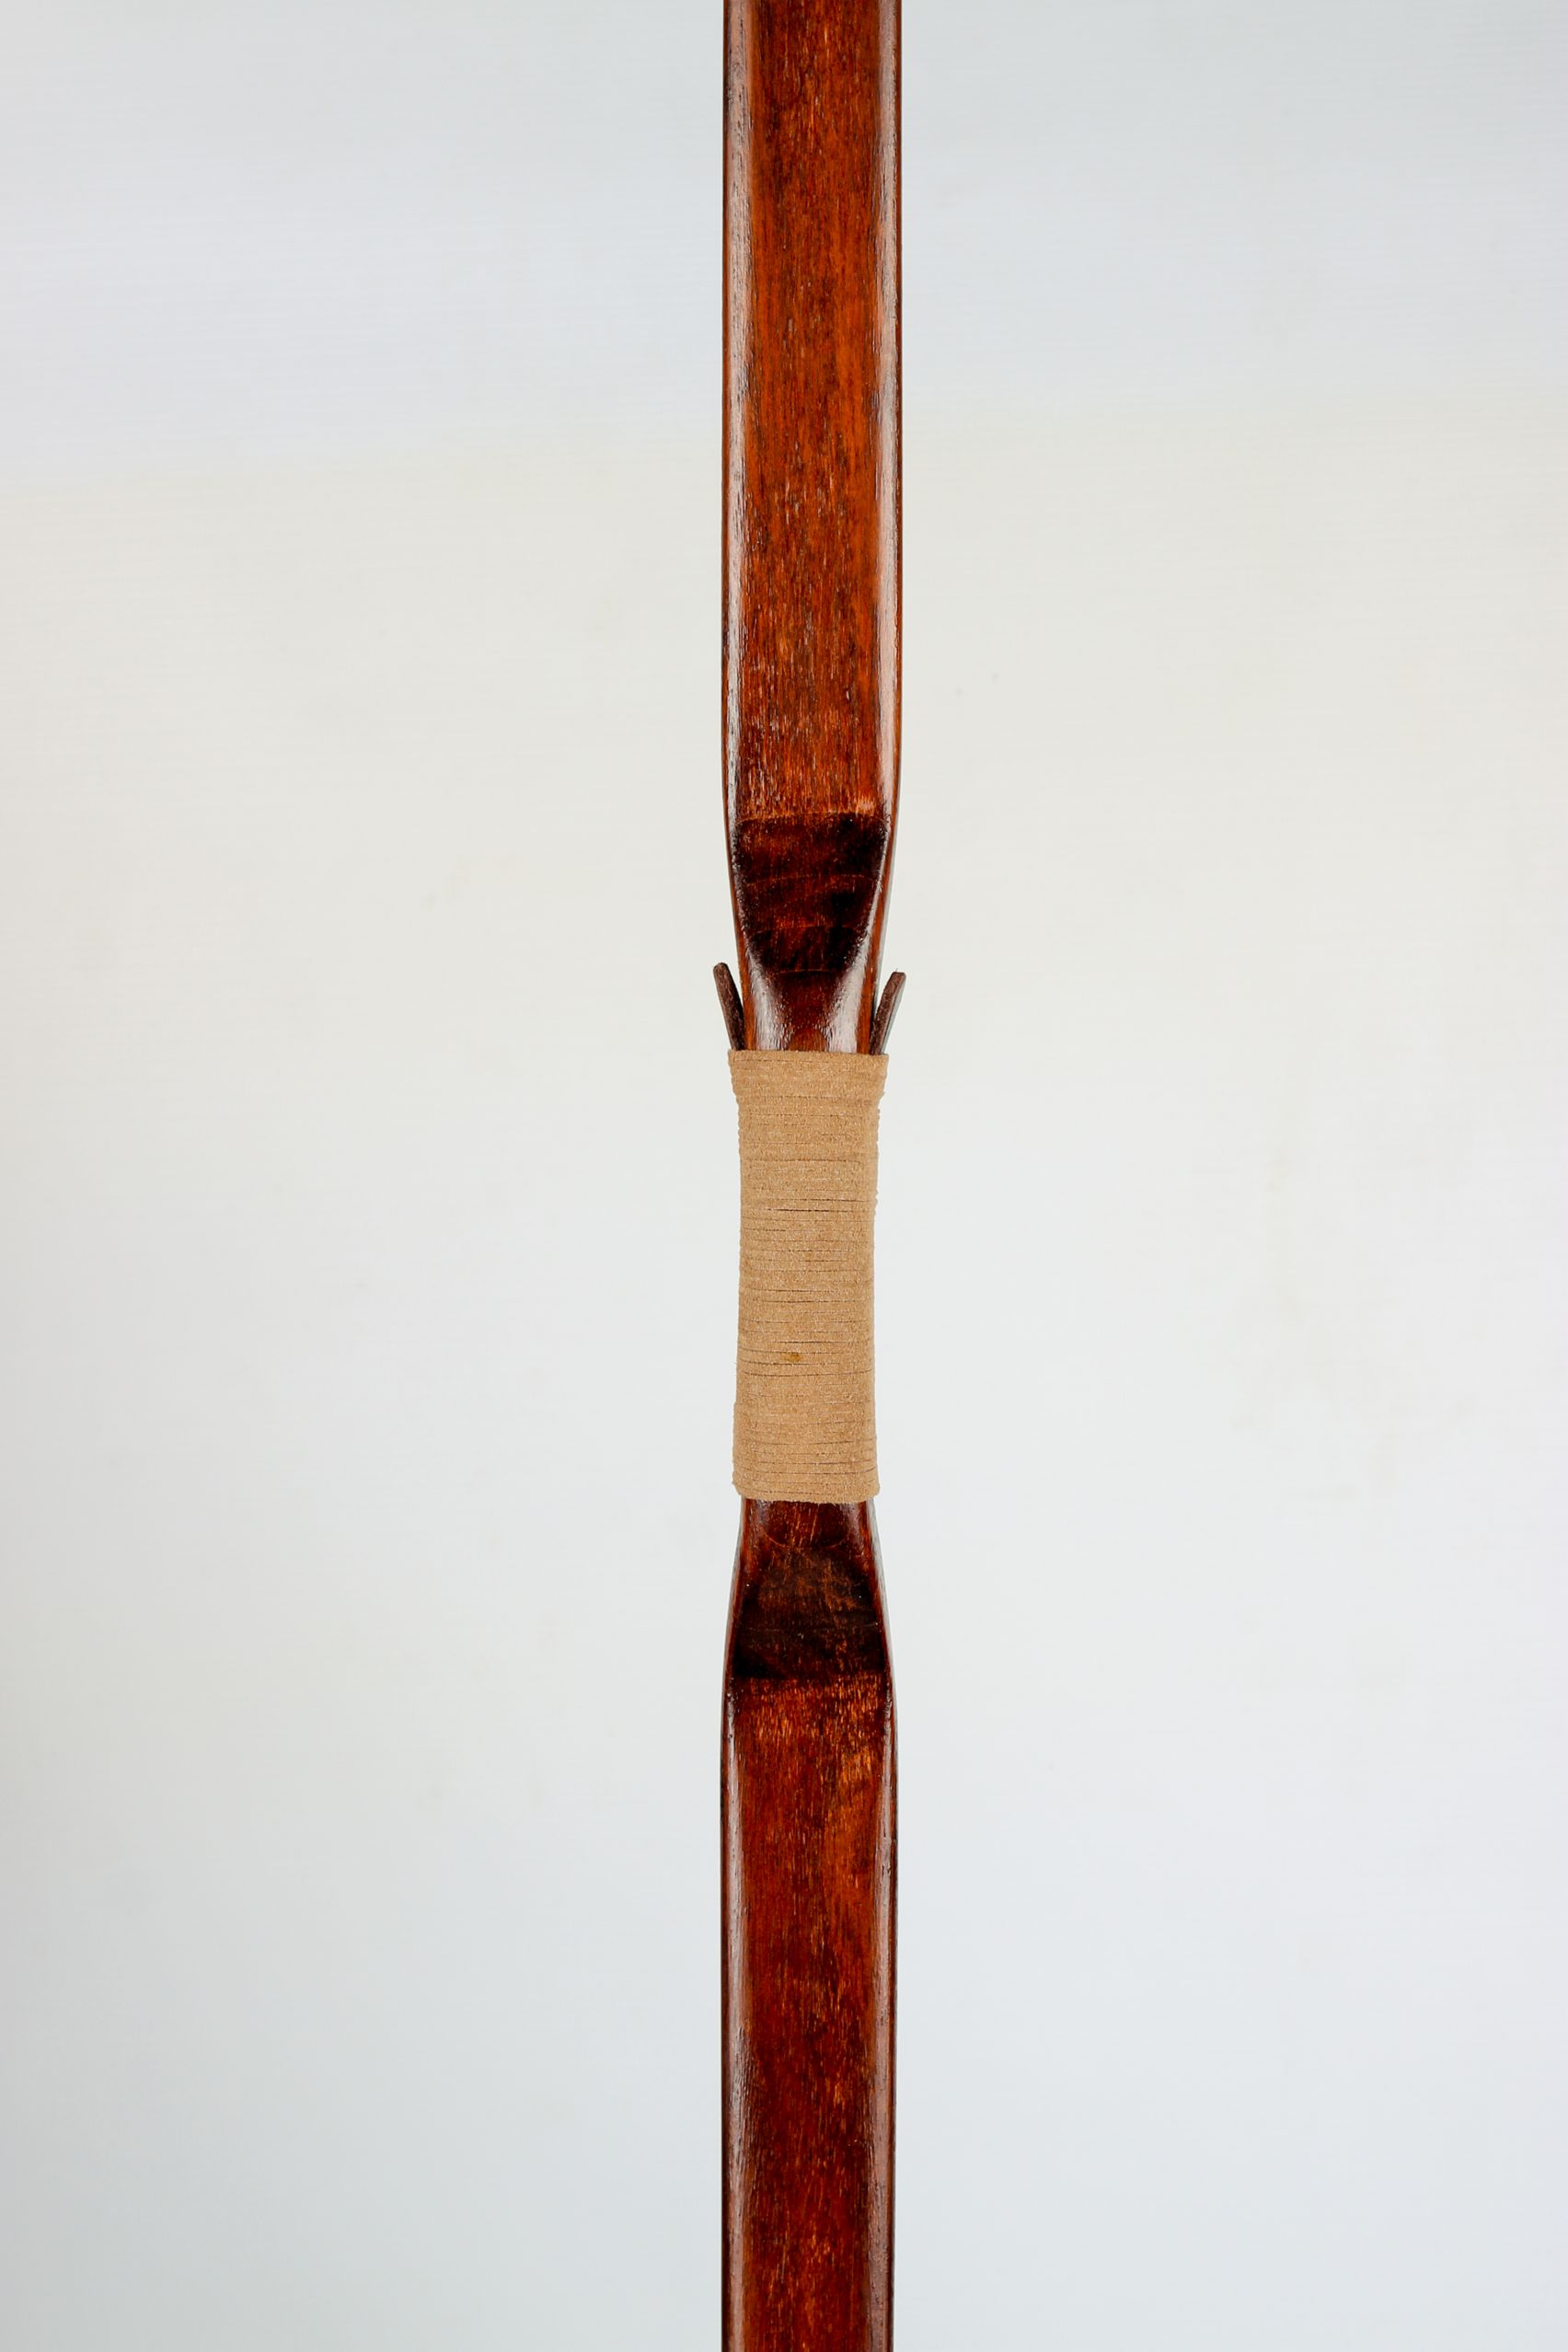 Part of the wooden bow, a shelf for the boom, stick